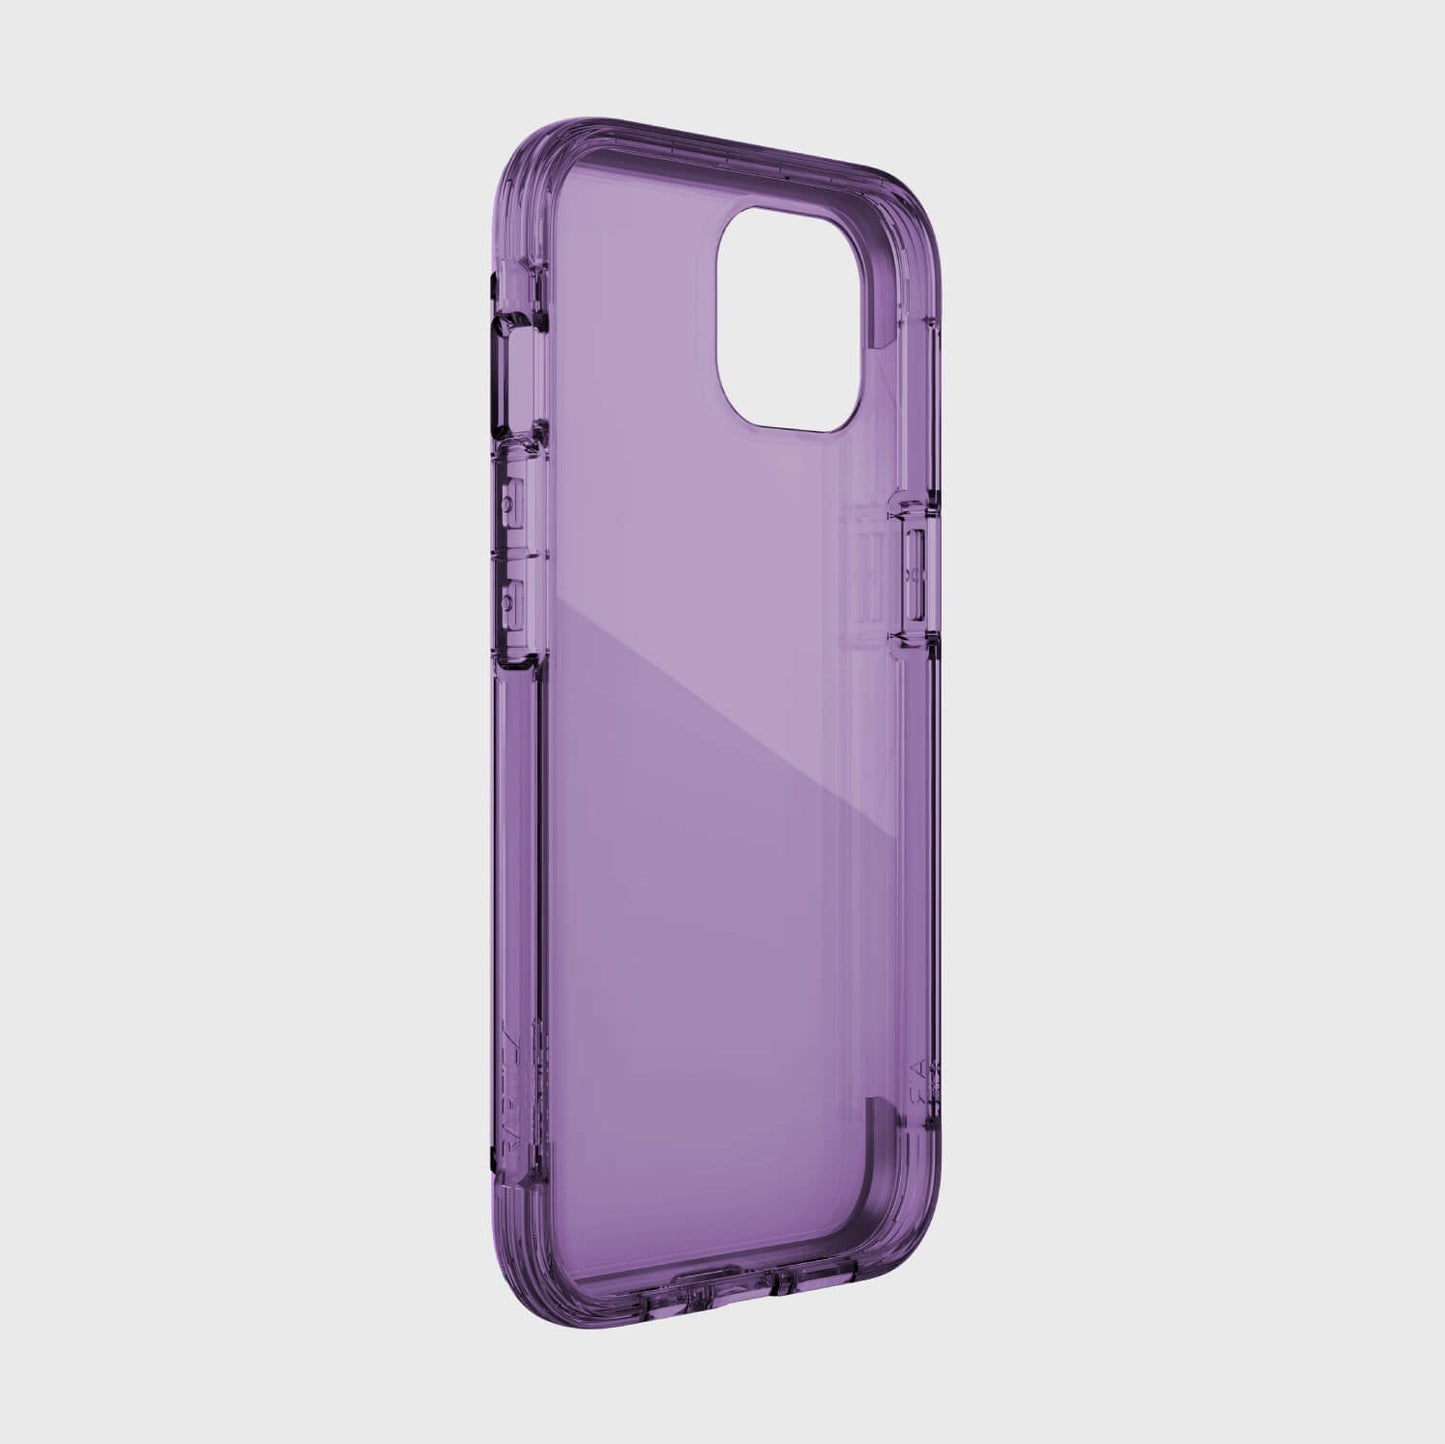 Raptic iPhone 13 Case - AIR - purple, drop proof with wireless charging compatibility.